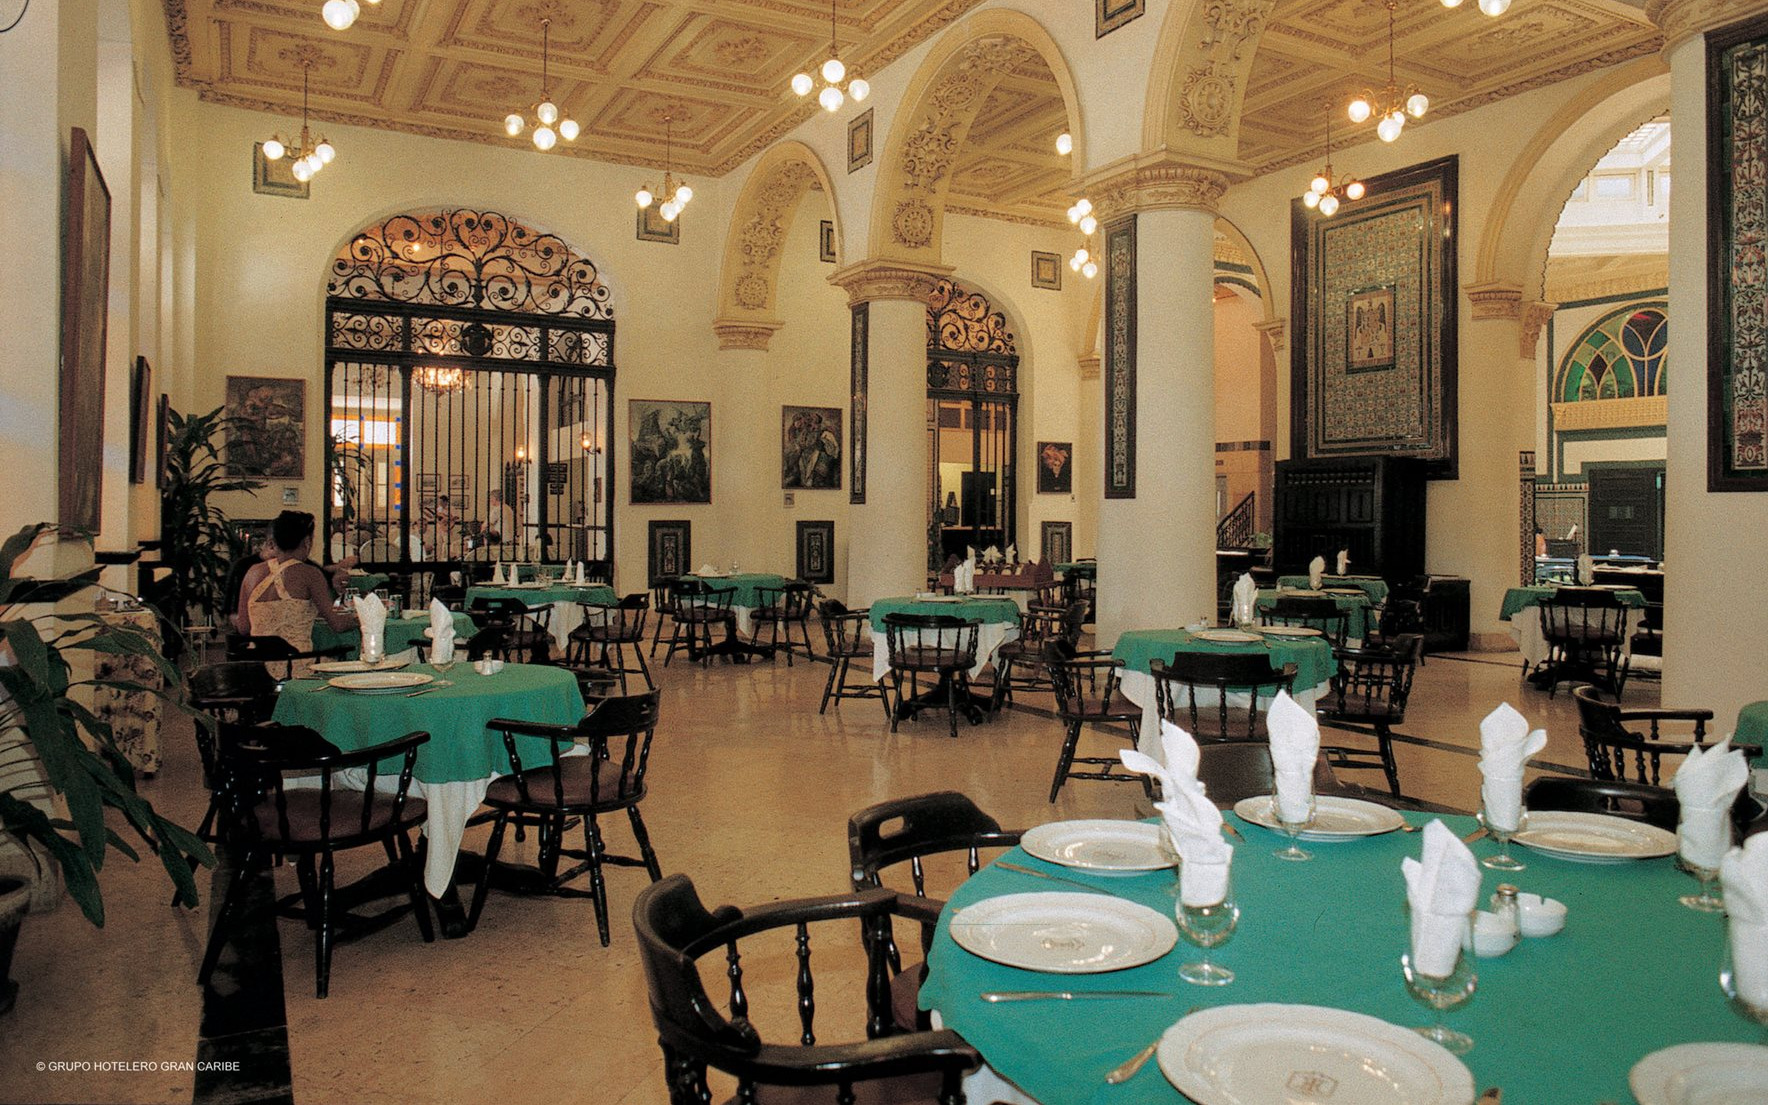 The Colonial restaurant